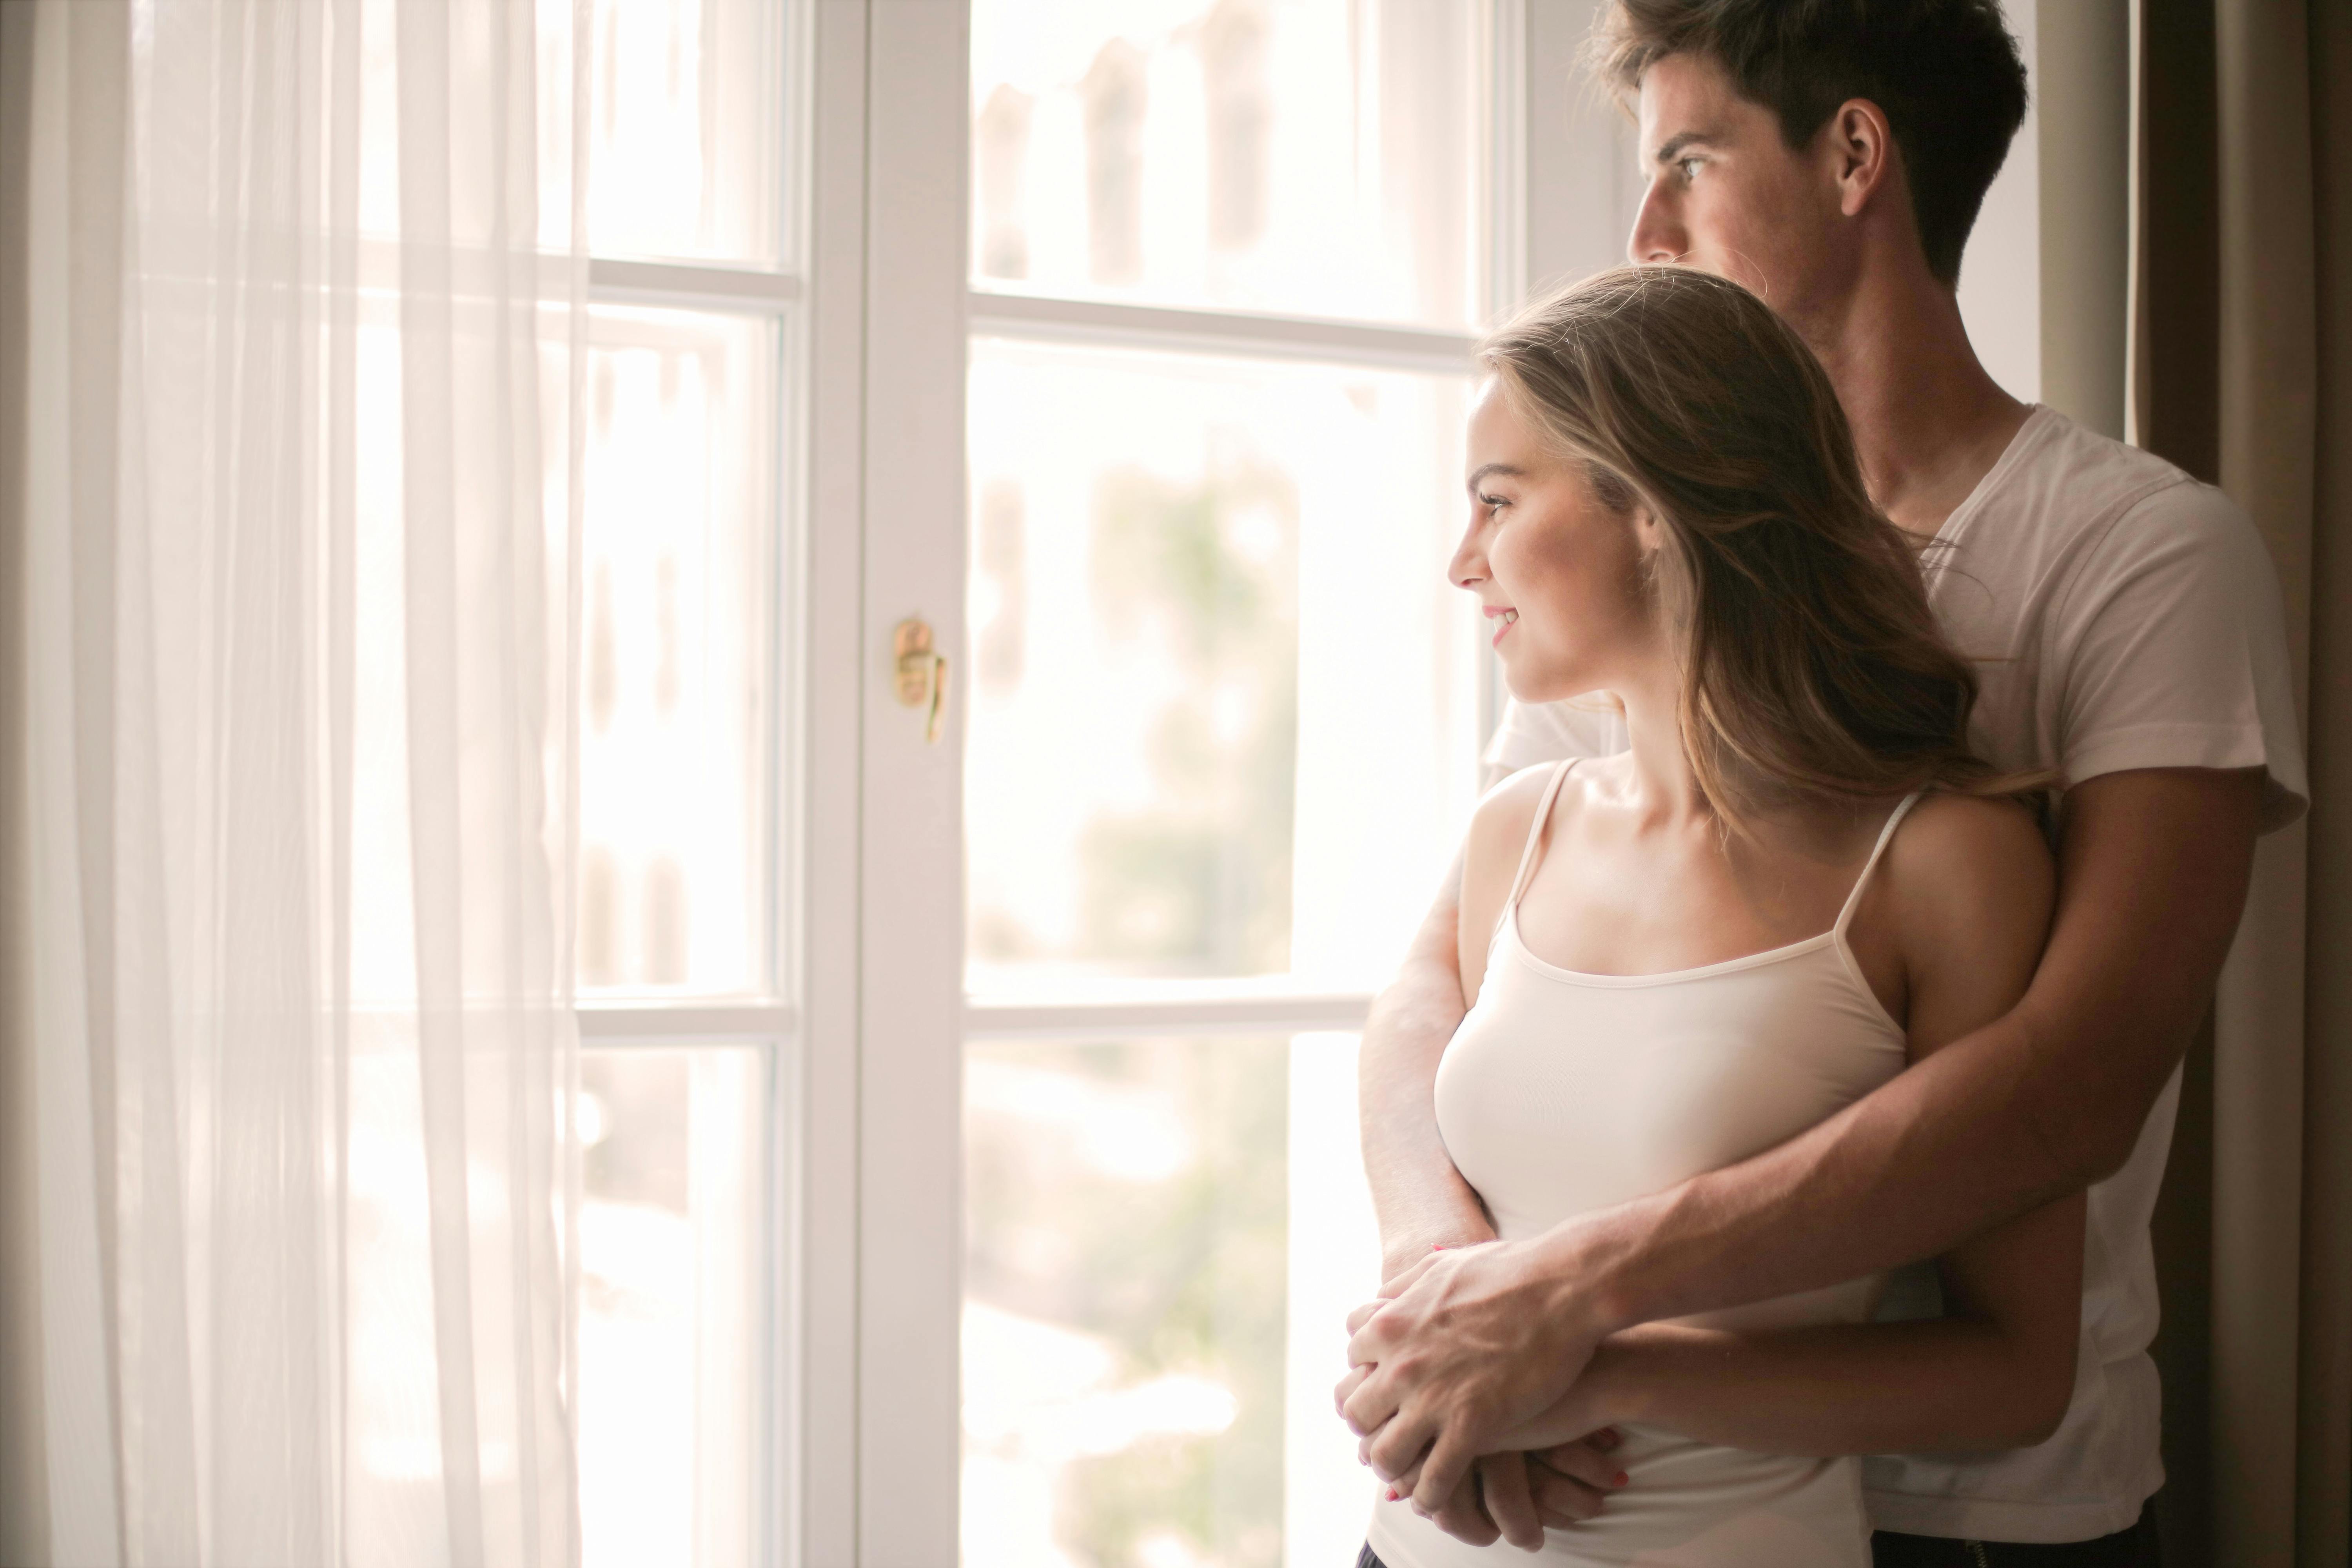 Couple in front of the window | Source: Pexels